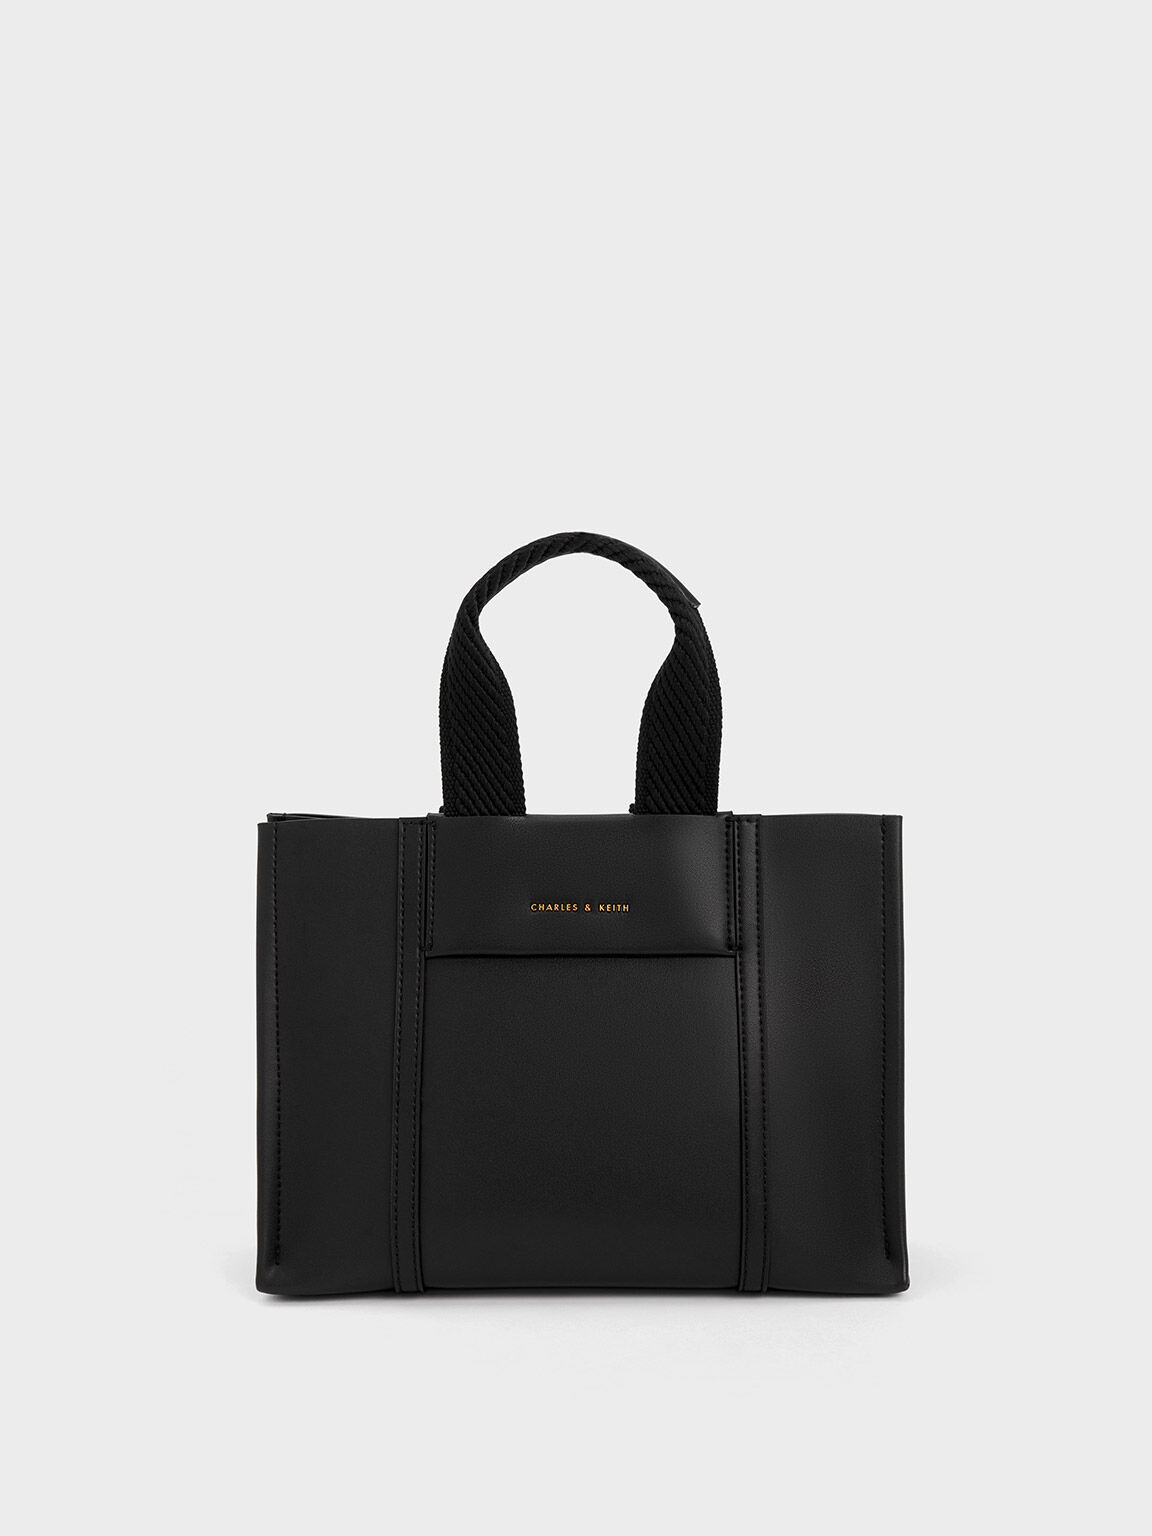 CHARLES & KEITH - Your on-the-go bag! This ultra matte black